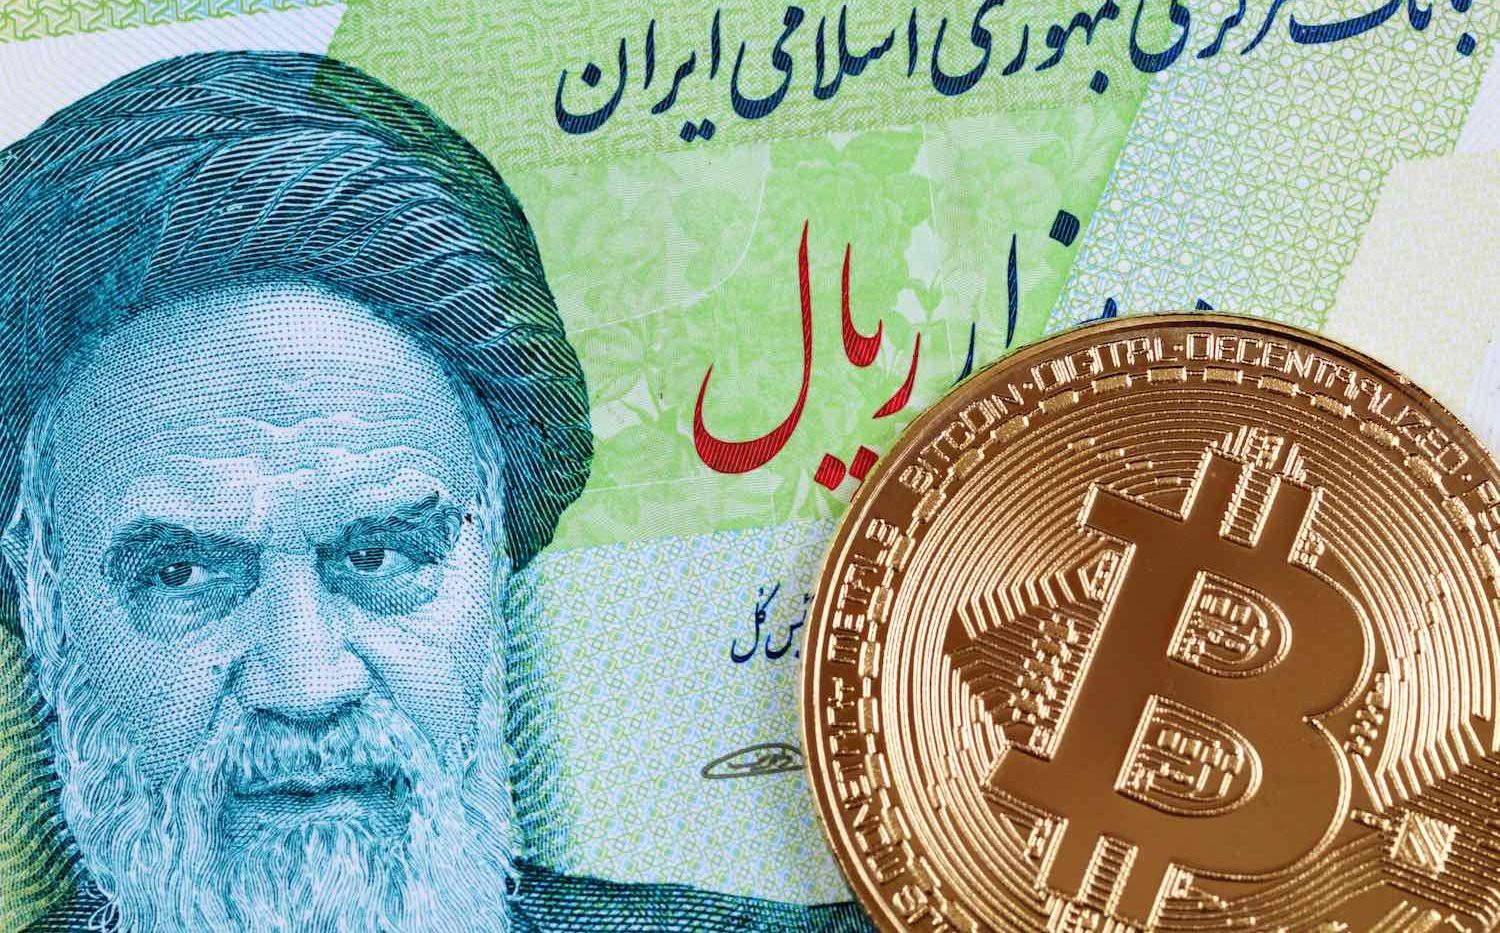 New Data Gives Unprecedented Insight Into How Iranians Use Bitcoin